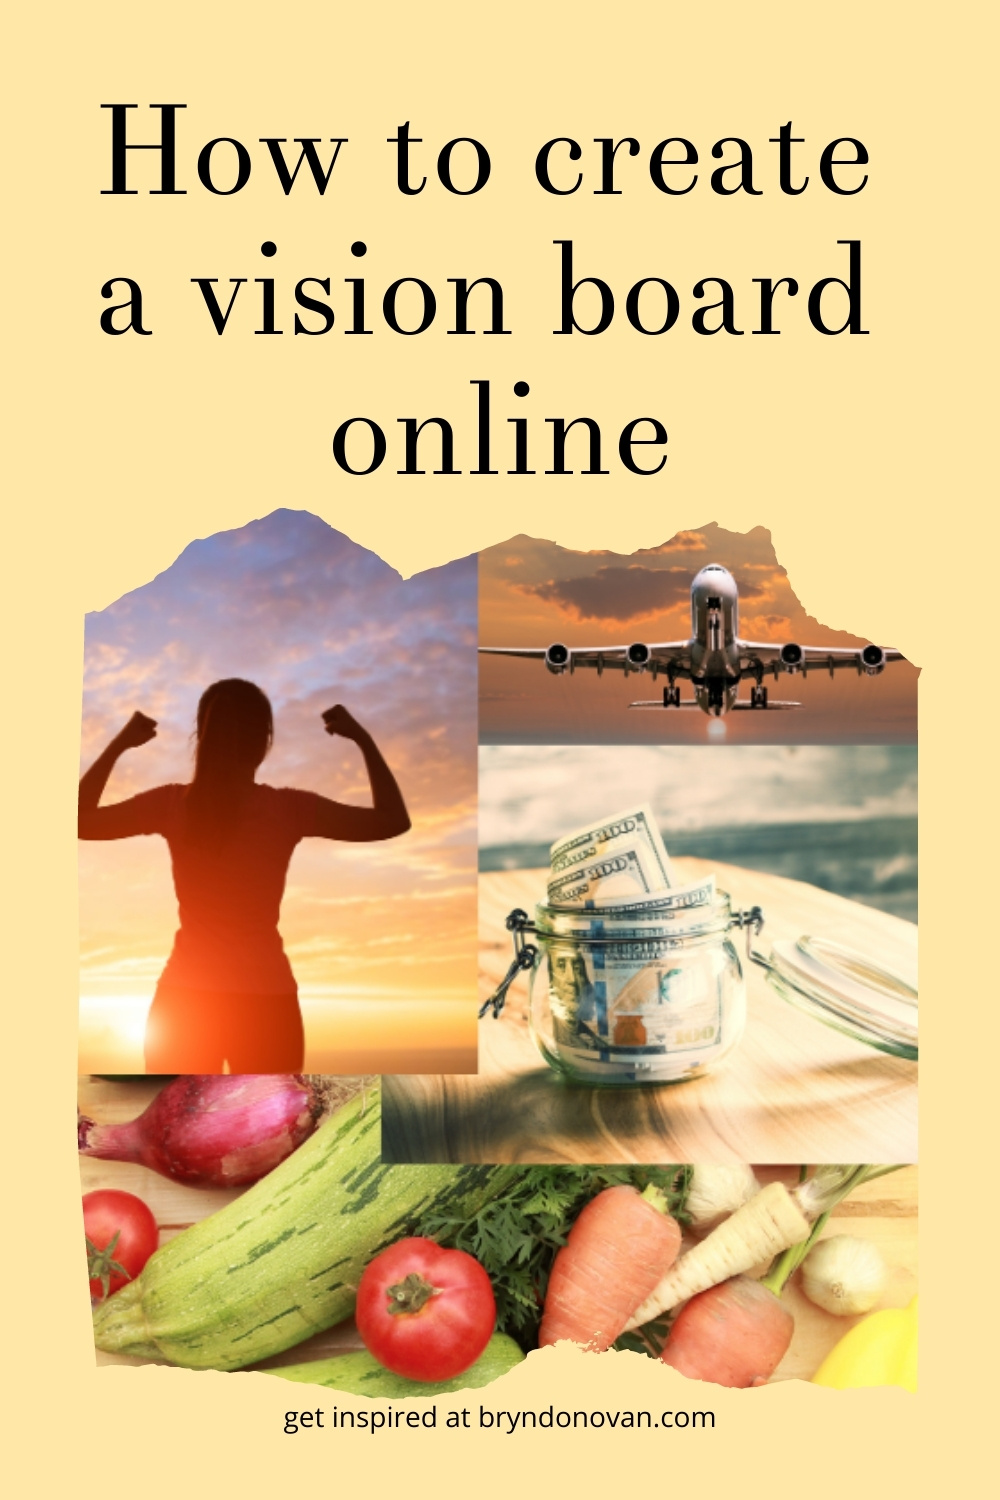 How to Make a Vision Board Online